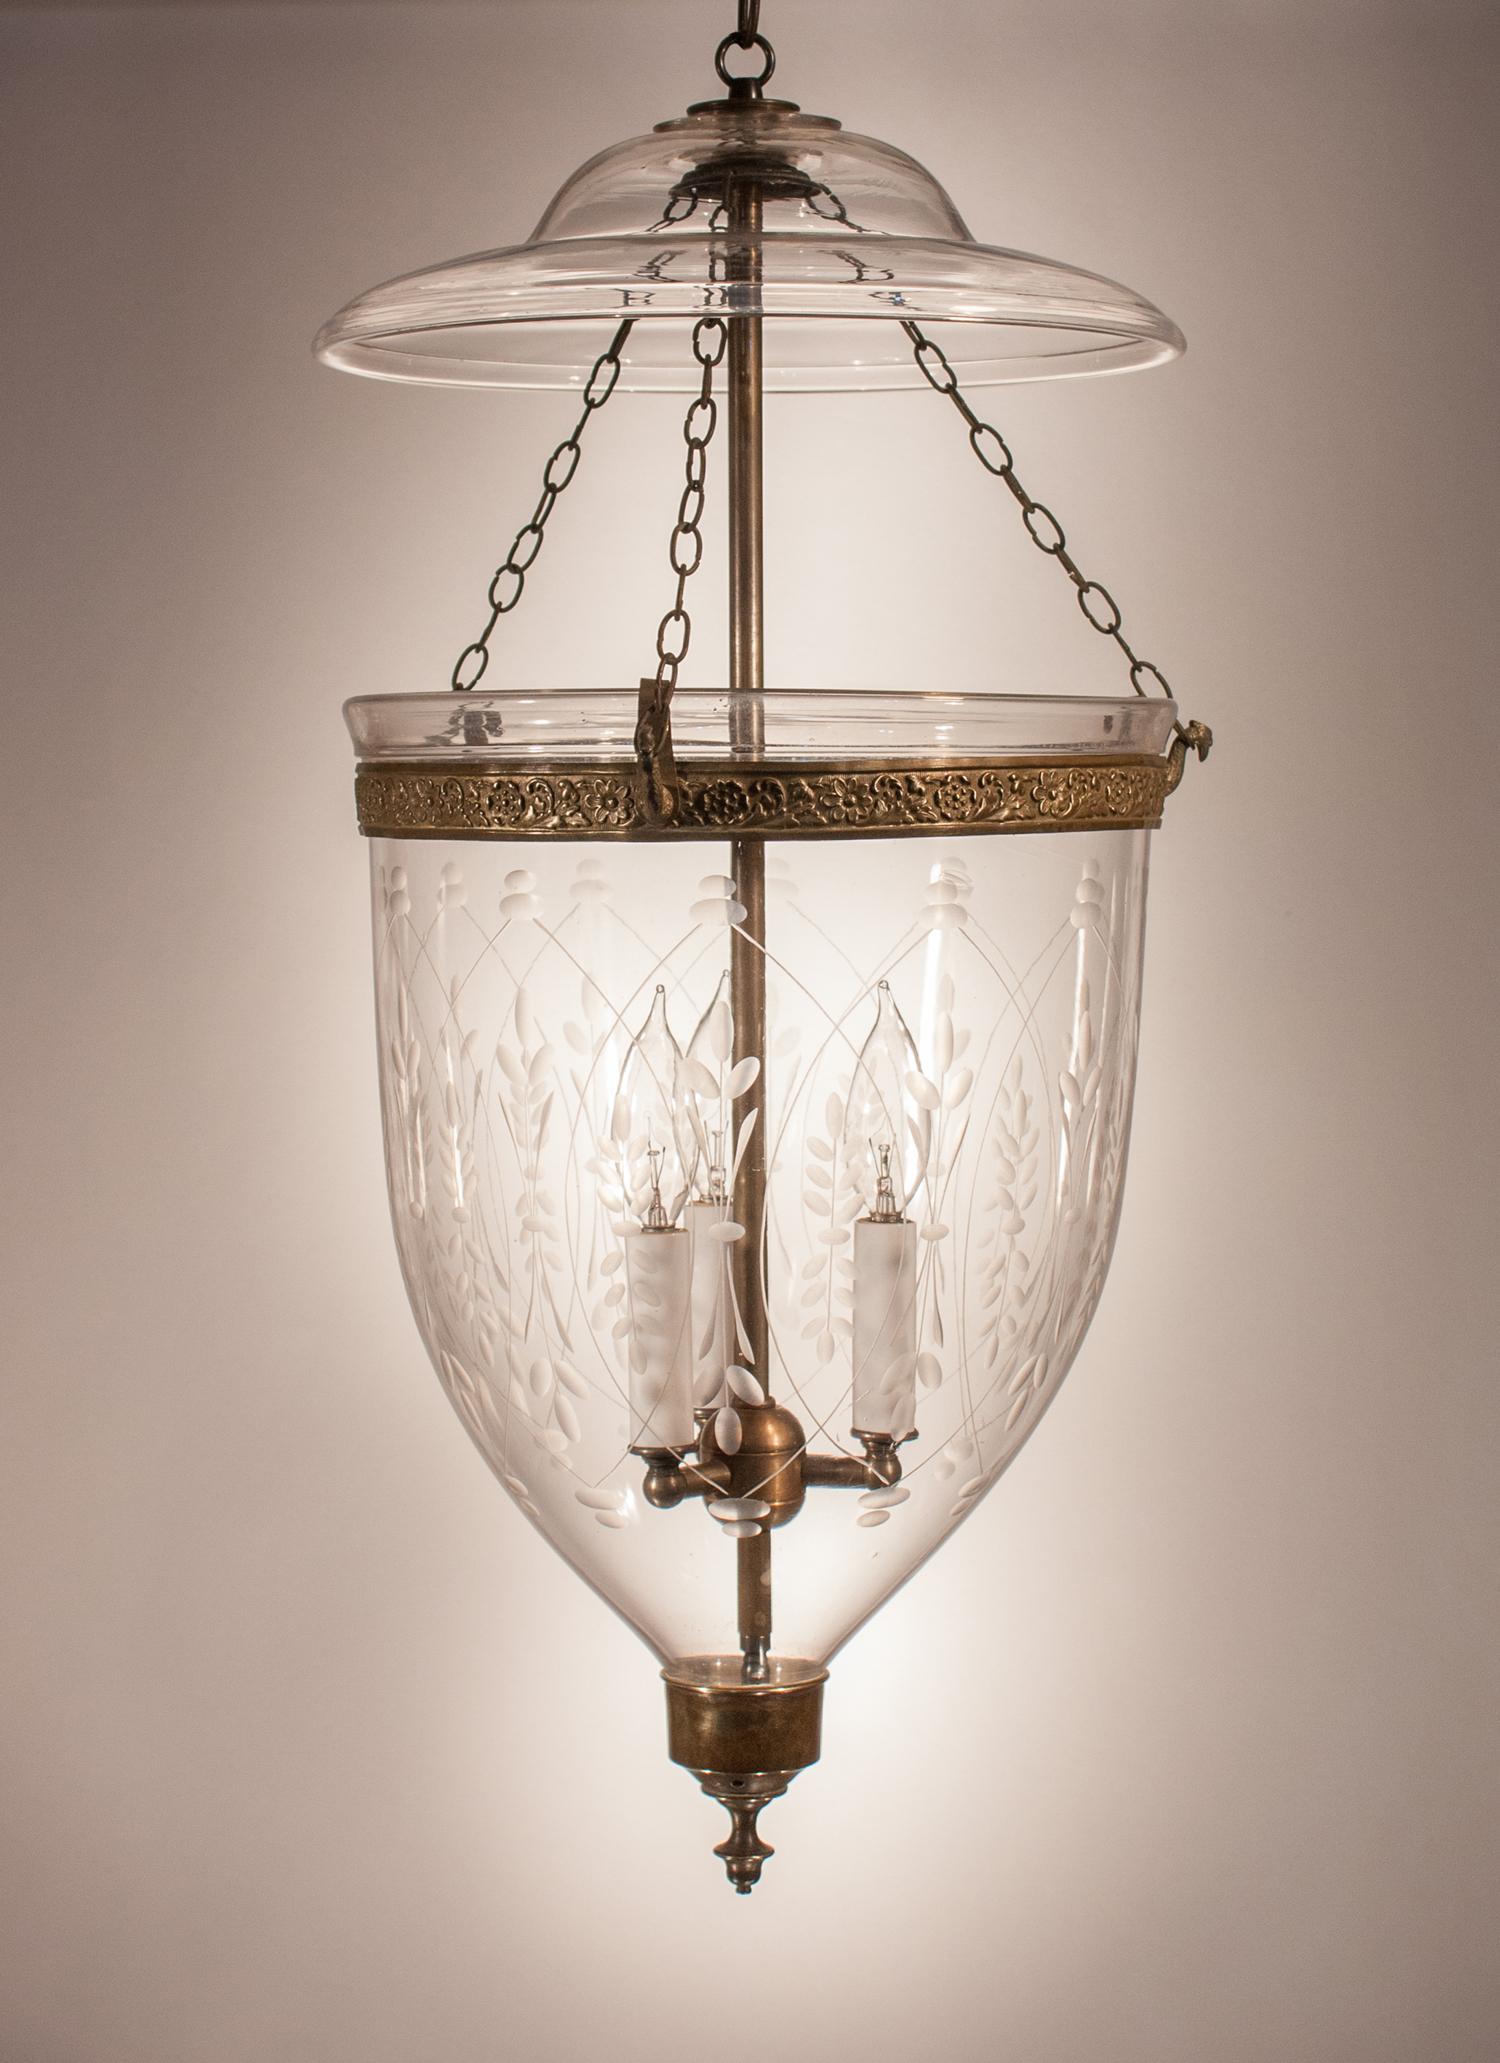 A larger-sized English bell jar lantern with classic form and high-quality handblown glass, circa 1840. This bell jar pendant features all-original fittings, including its smoke bell/lid, embossed brass band, and brass candle holder finial base. The